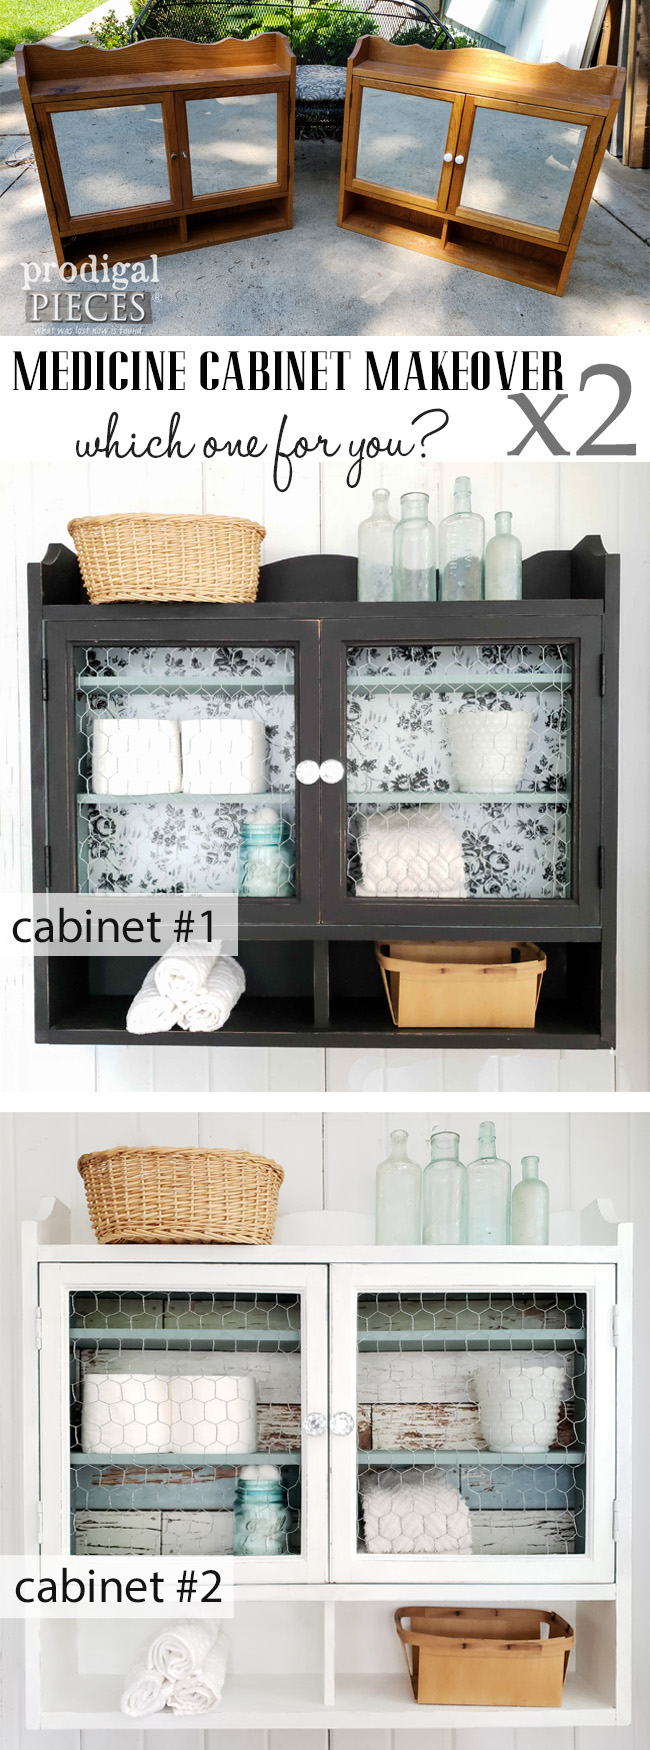 Check out this thrifted medicine cabinet makeover by Larissa of Prodigal Pieces. This pair looks like night and day compared to their original look. Easy DIY steps to recreate your home decor at prodigalpieces.com #prodigalpieces #homedecor #farmhouse #diy